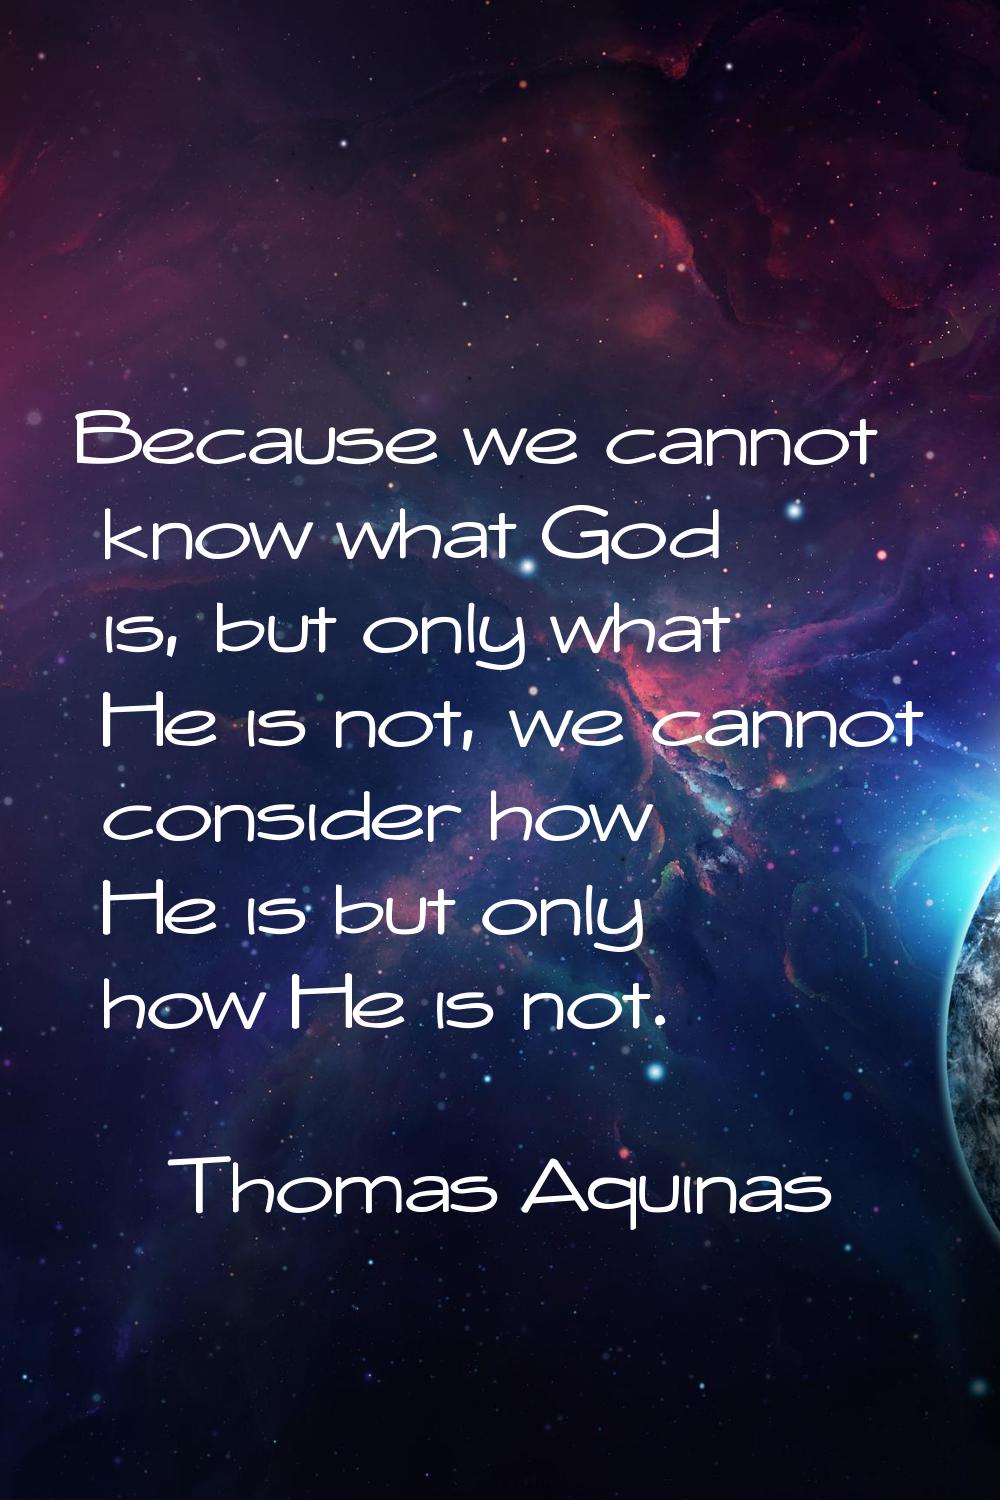 Because we cannot know what God is, but only what He is not, we cannot consider how He is but only 